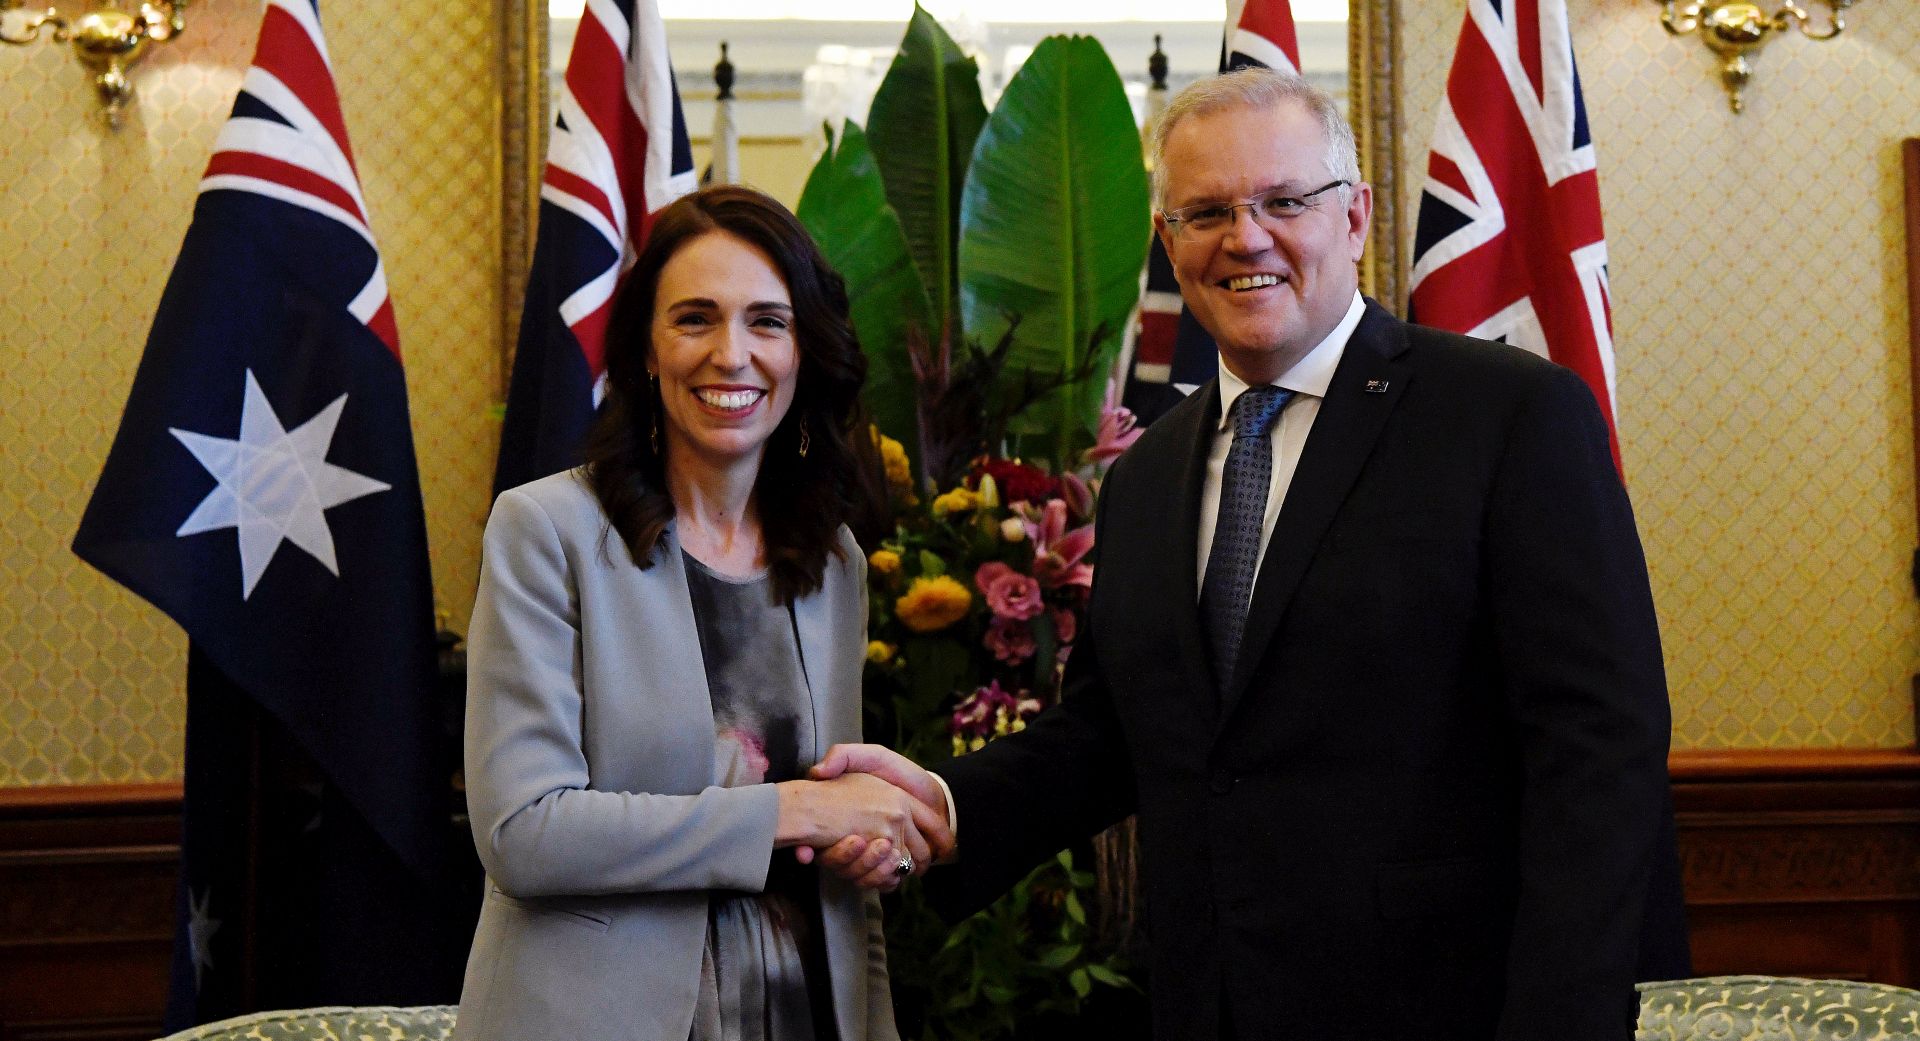 epa08254237 New Zealand Prime Minister Jacinda Ardern (L) and Australian Prime Minister Scott Morrison (R) pose for photos during a meeting at Admiralty House in Sydney, Australia, 28 February 2020.  EPA/BIANCA DE MARCHI  AUSTRALIA AND NEW ZEALAND OUT